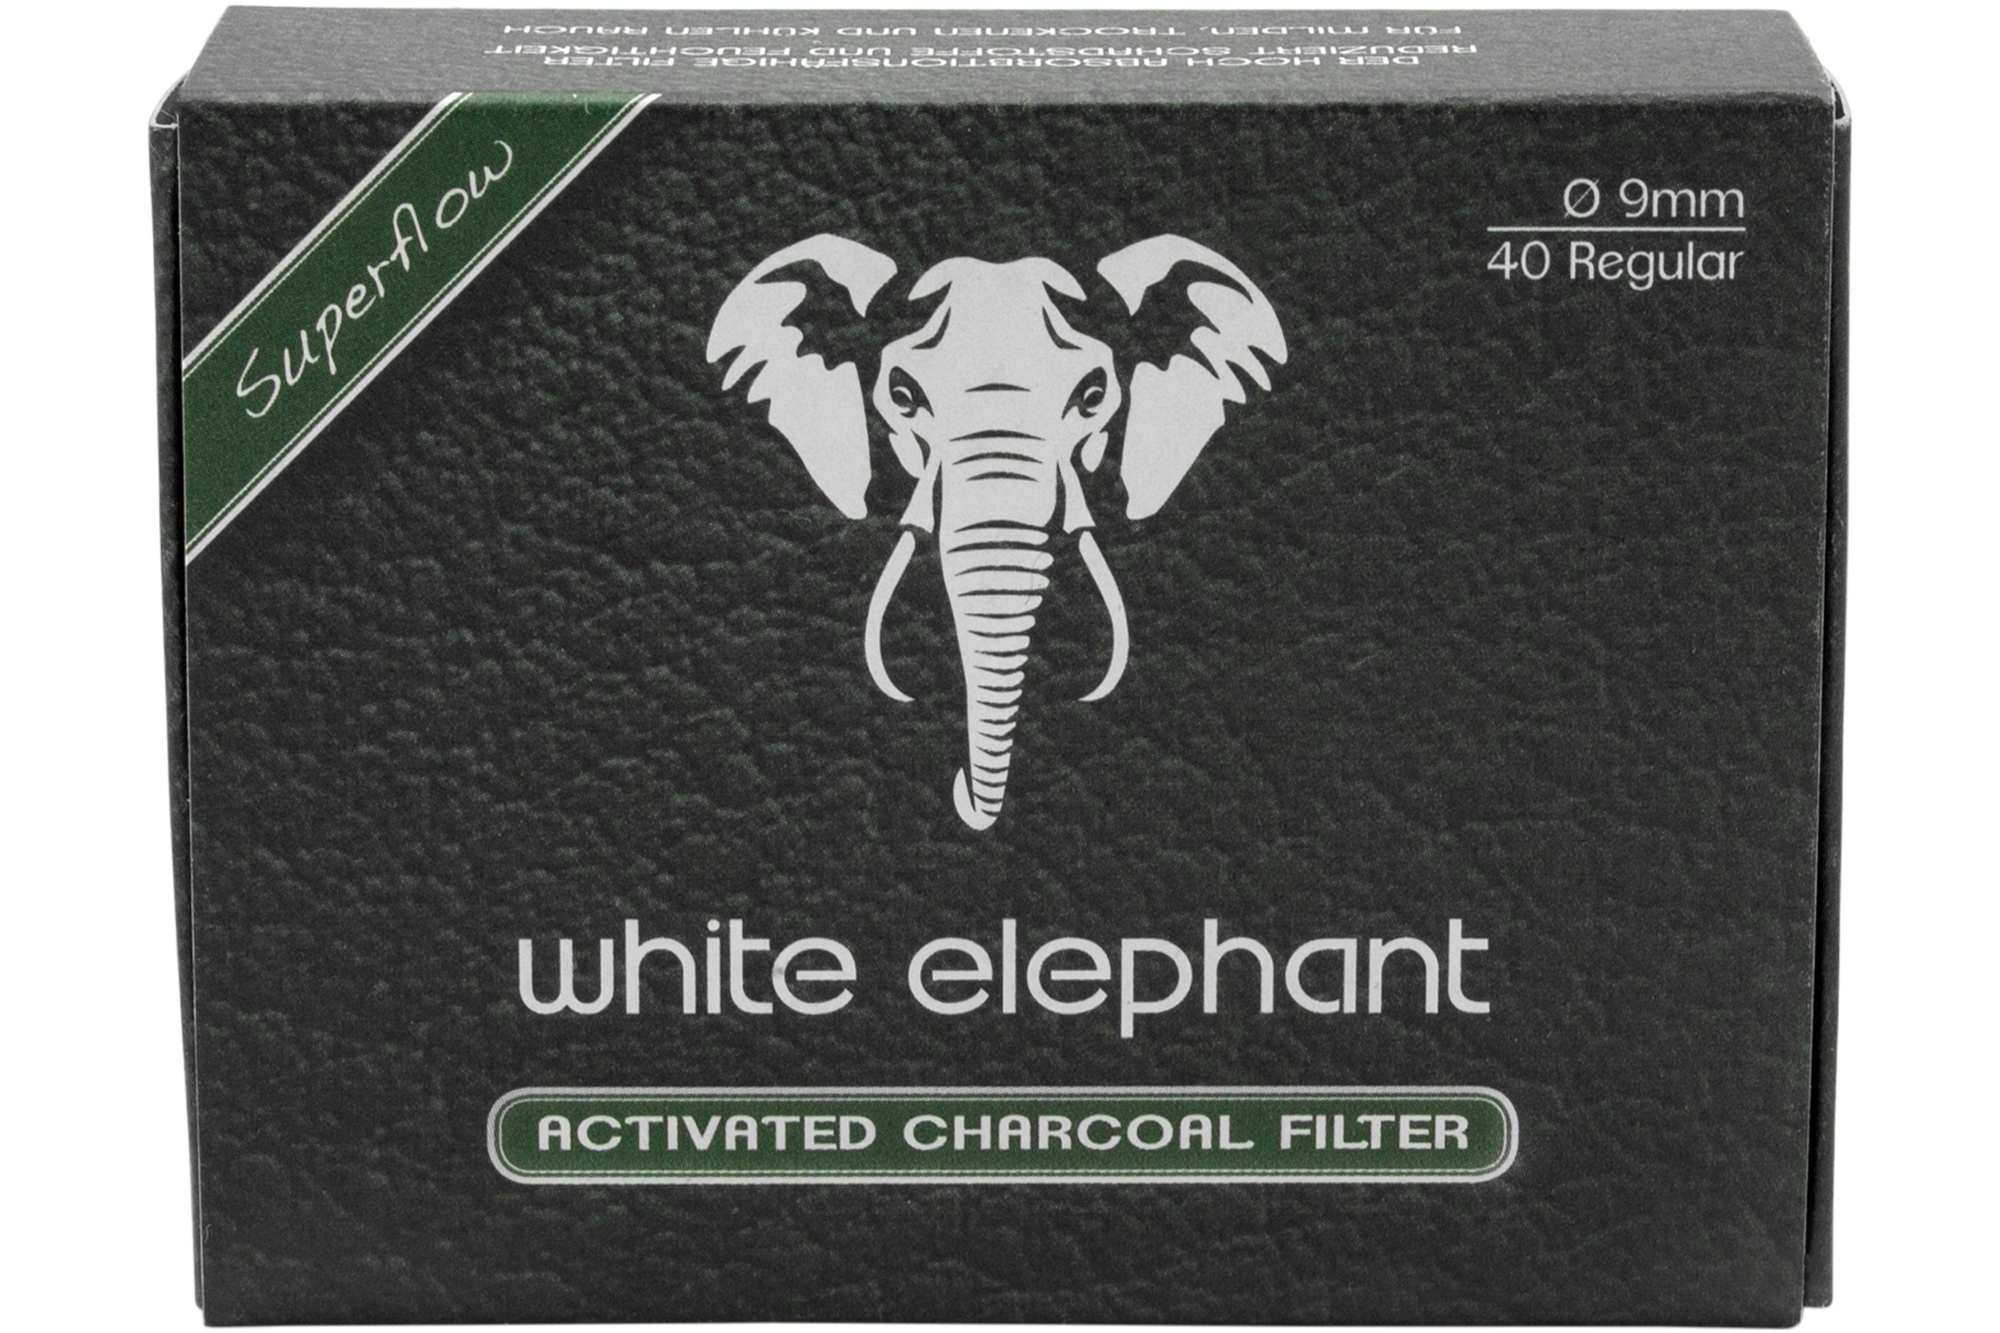 Kopp white elephant activated charcoal filters available on Jonnybaba 